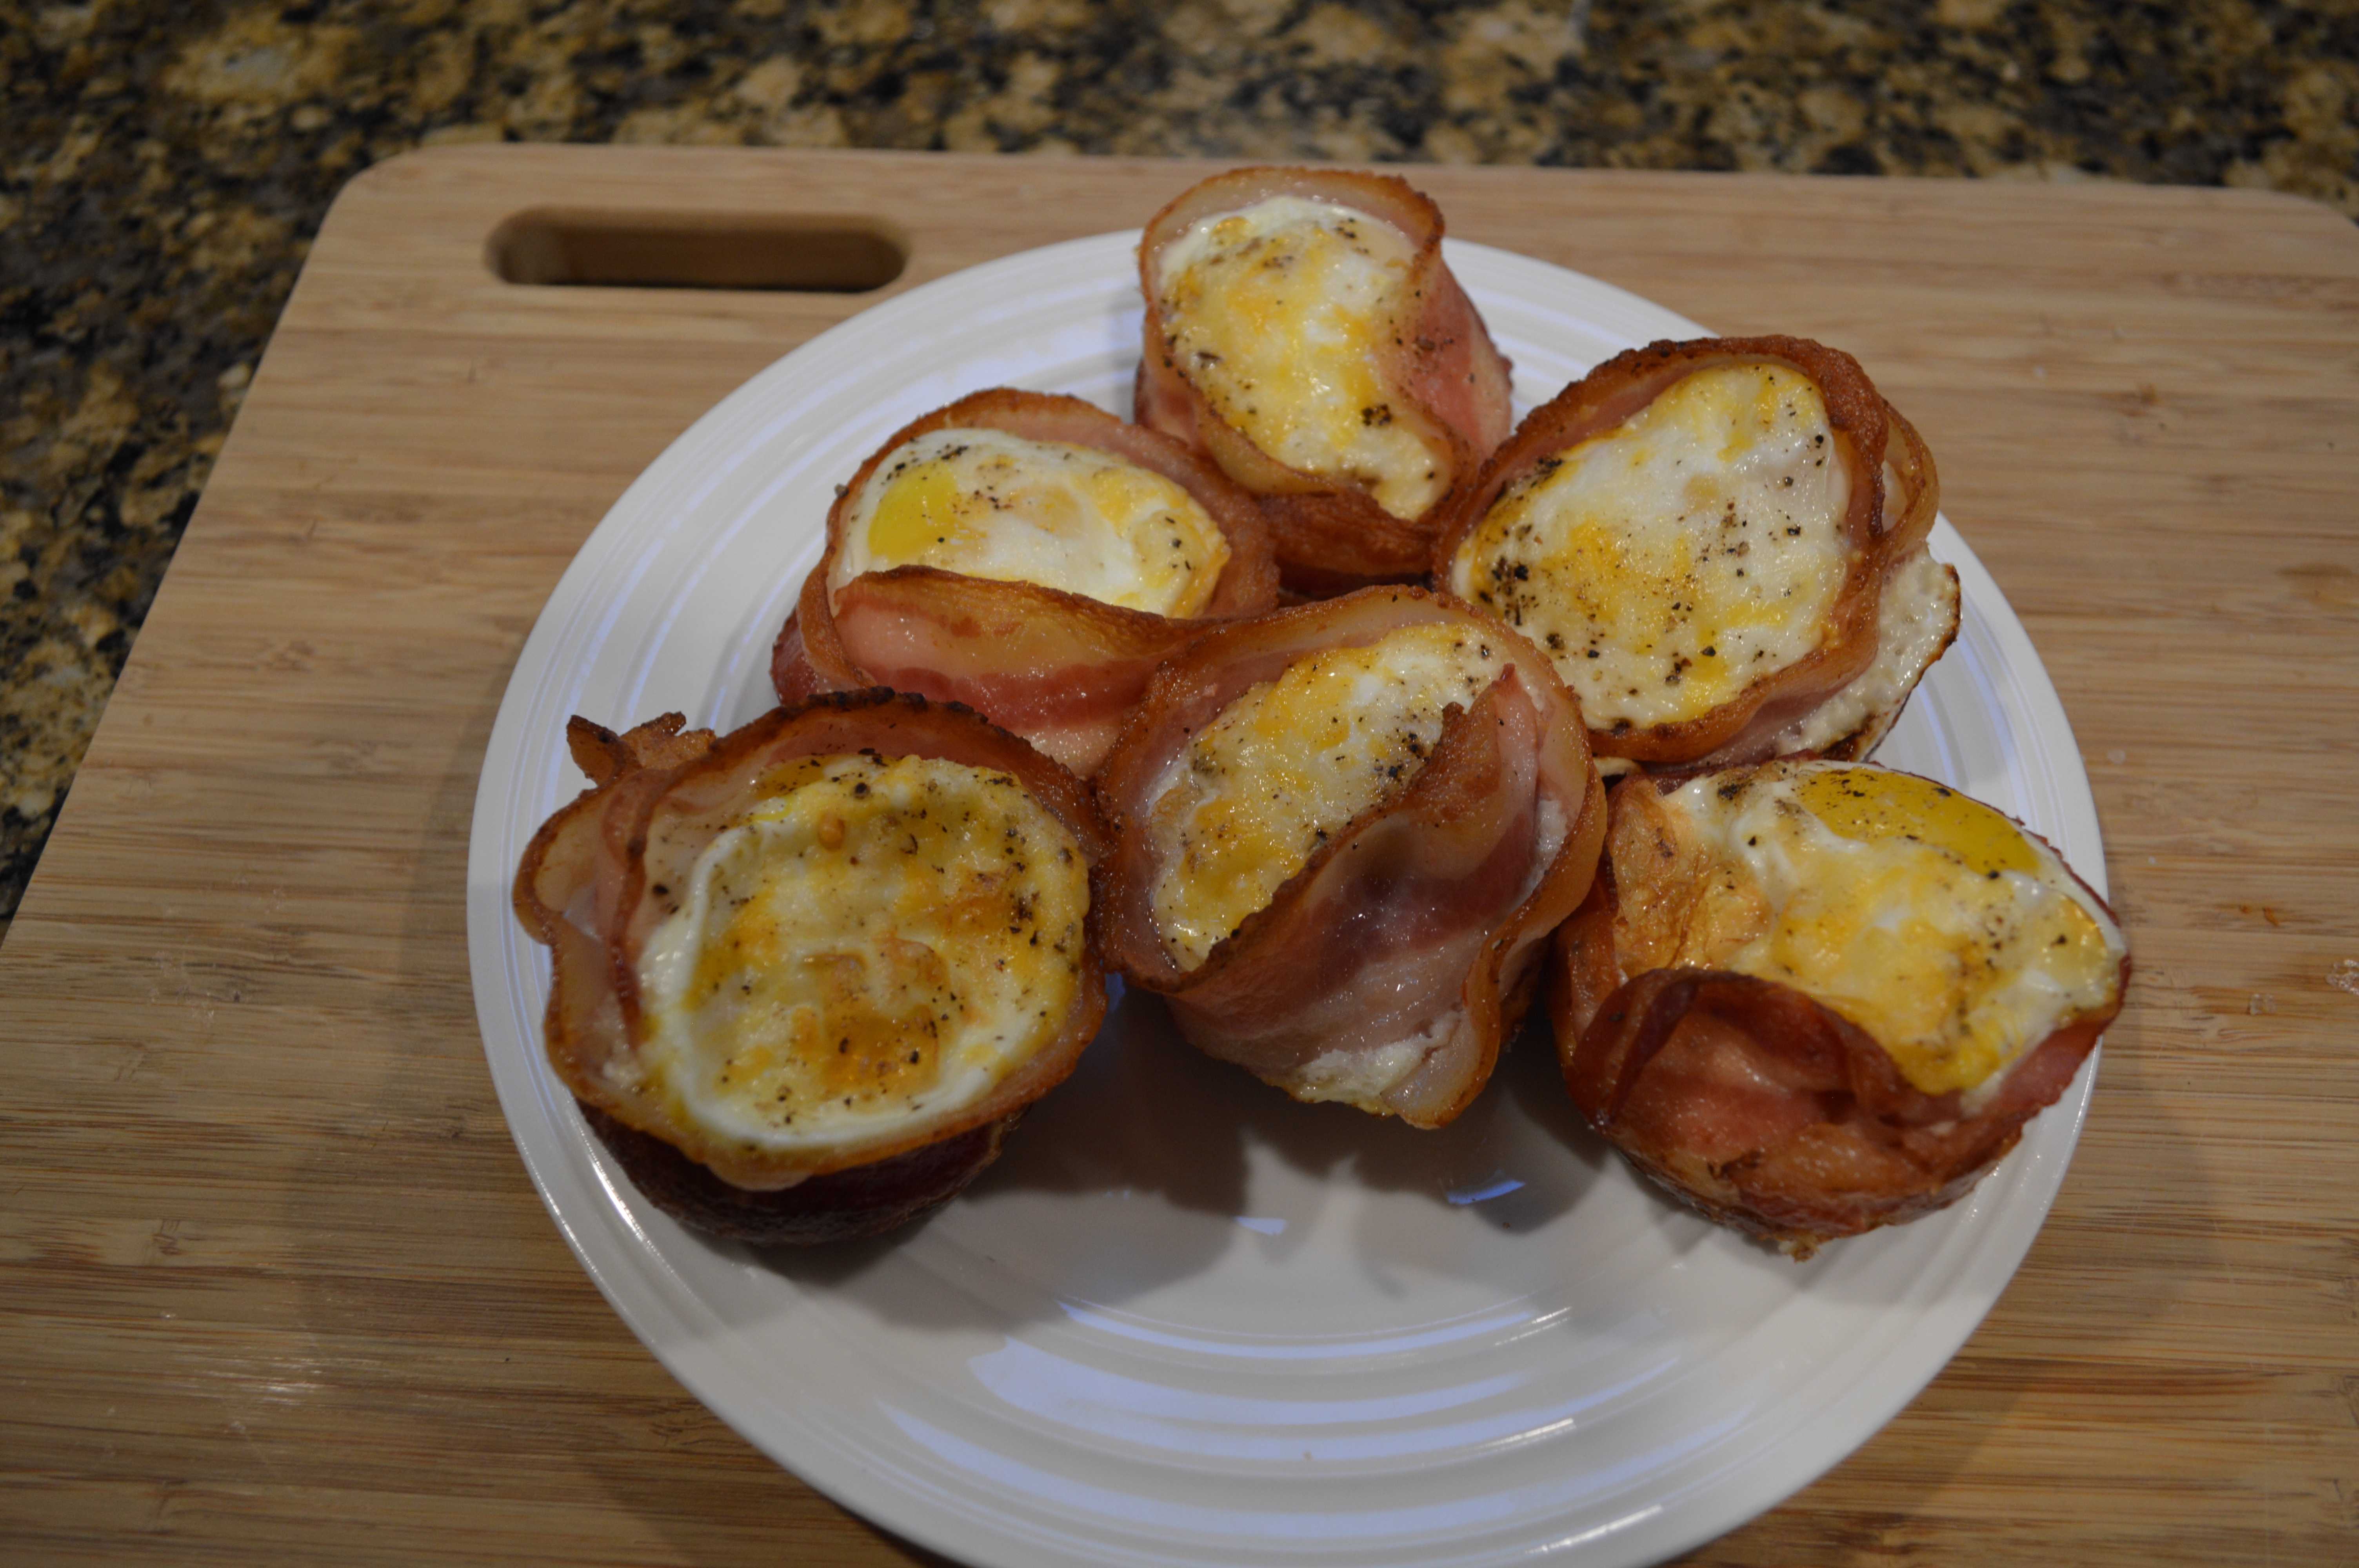 These bacon egg cups were extremely easy to make, and the different textures played with each other well.